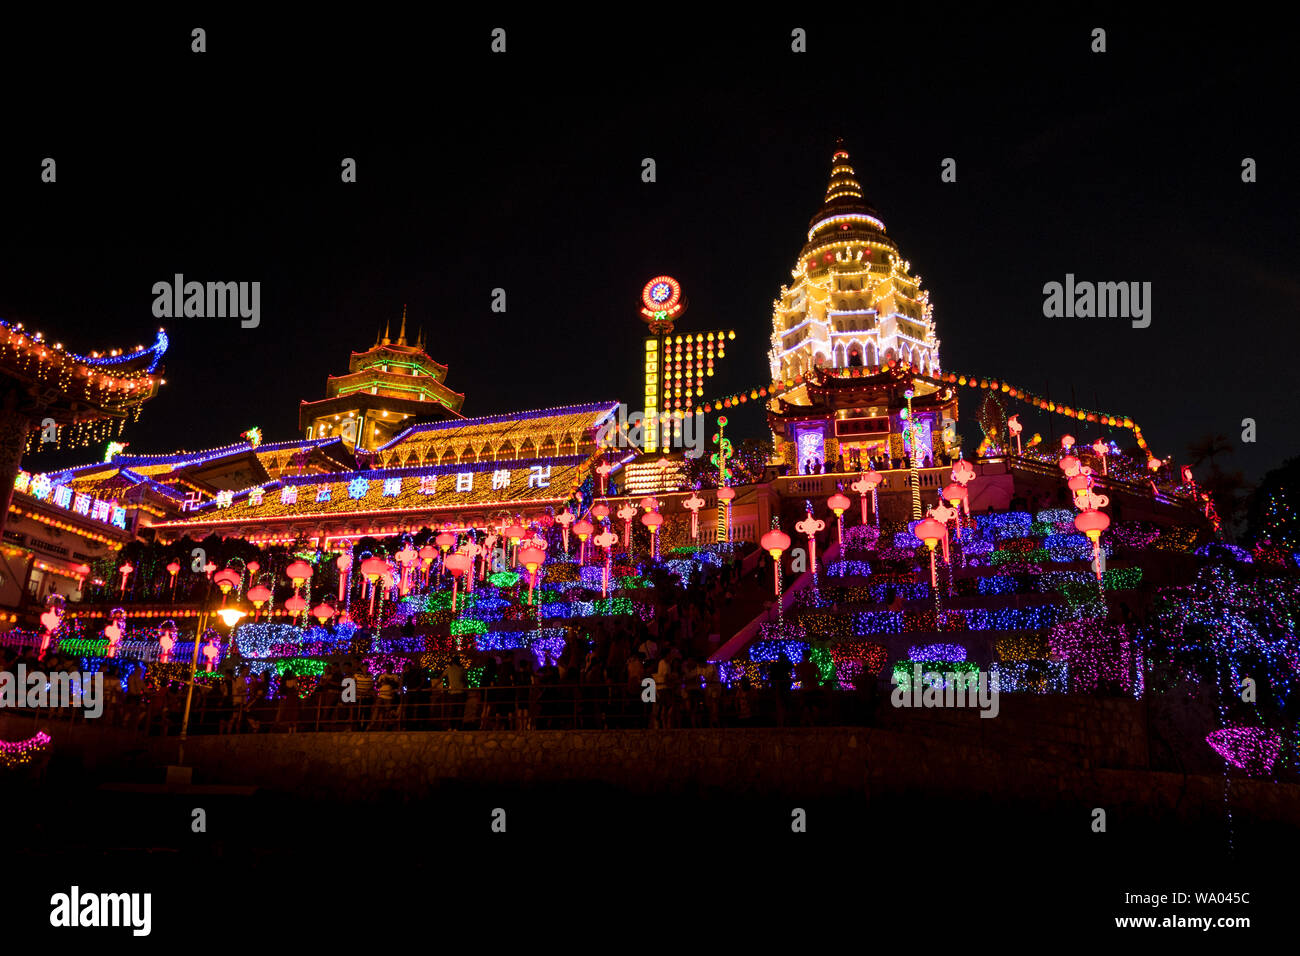 The extensive, over the top lighting at the famed Kek Lok Si Chinese temple in George Town, Penang, Malaysia. The temple puts on the amazing light sho Stock Photo